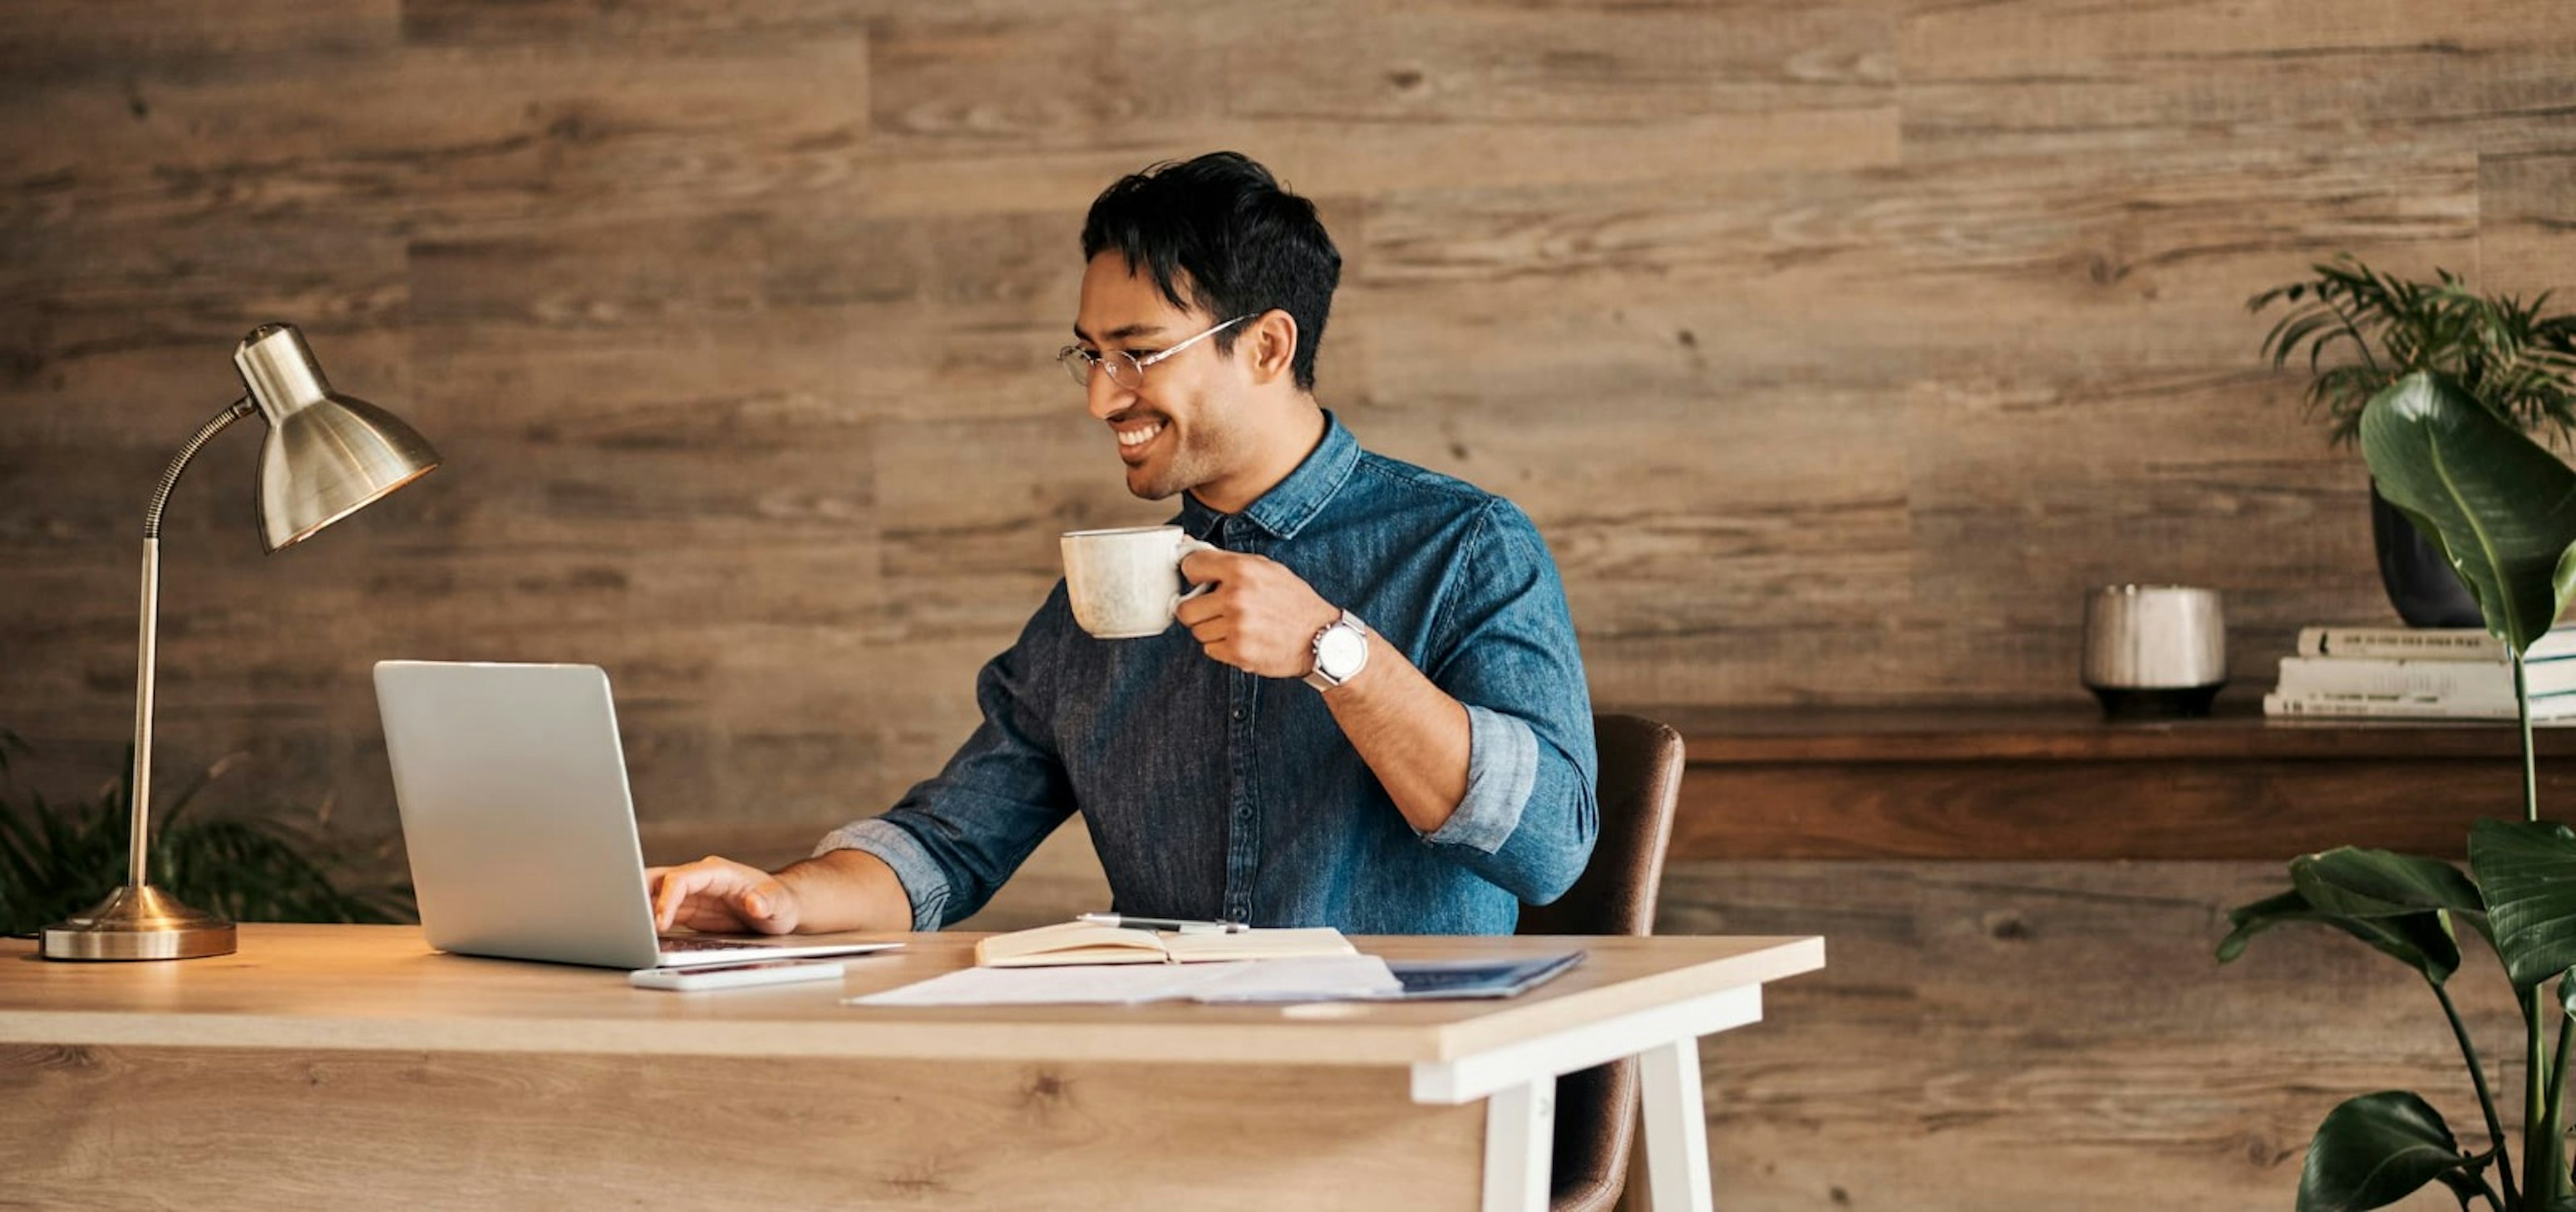 Man at desk drinking coffee and working on his laptop